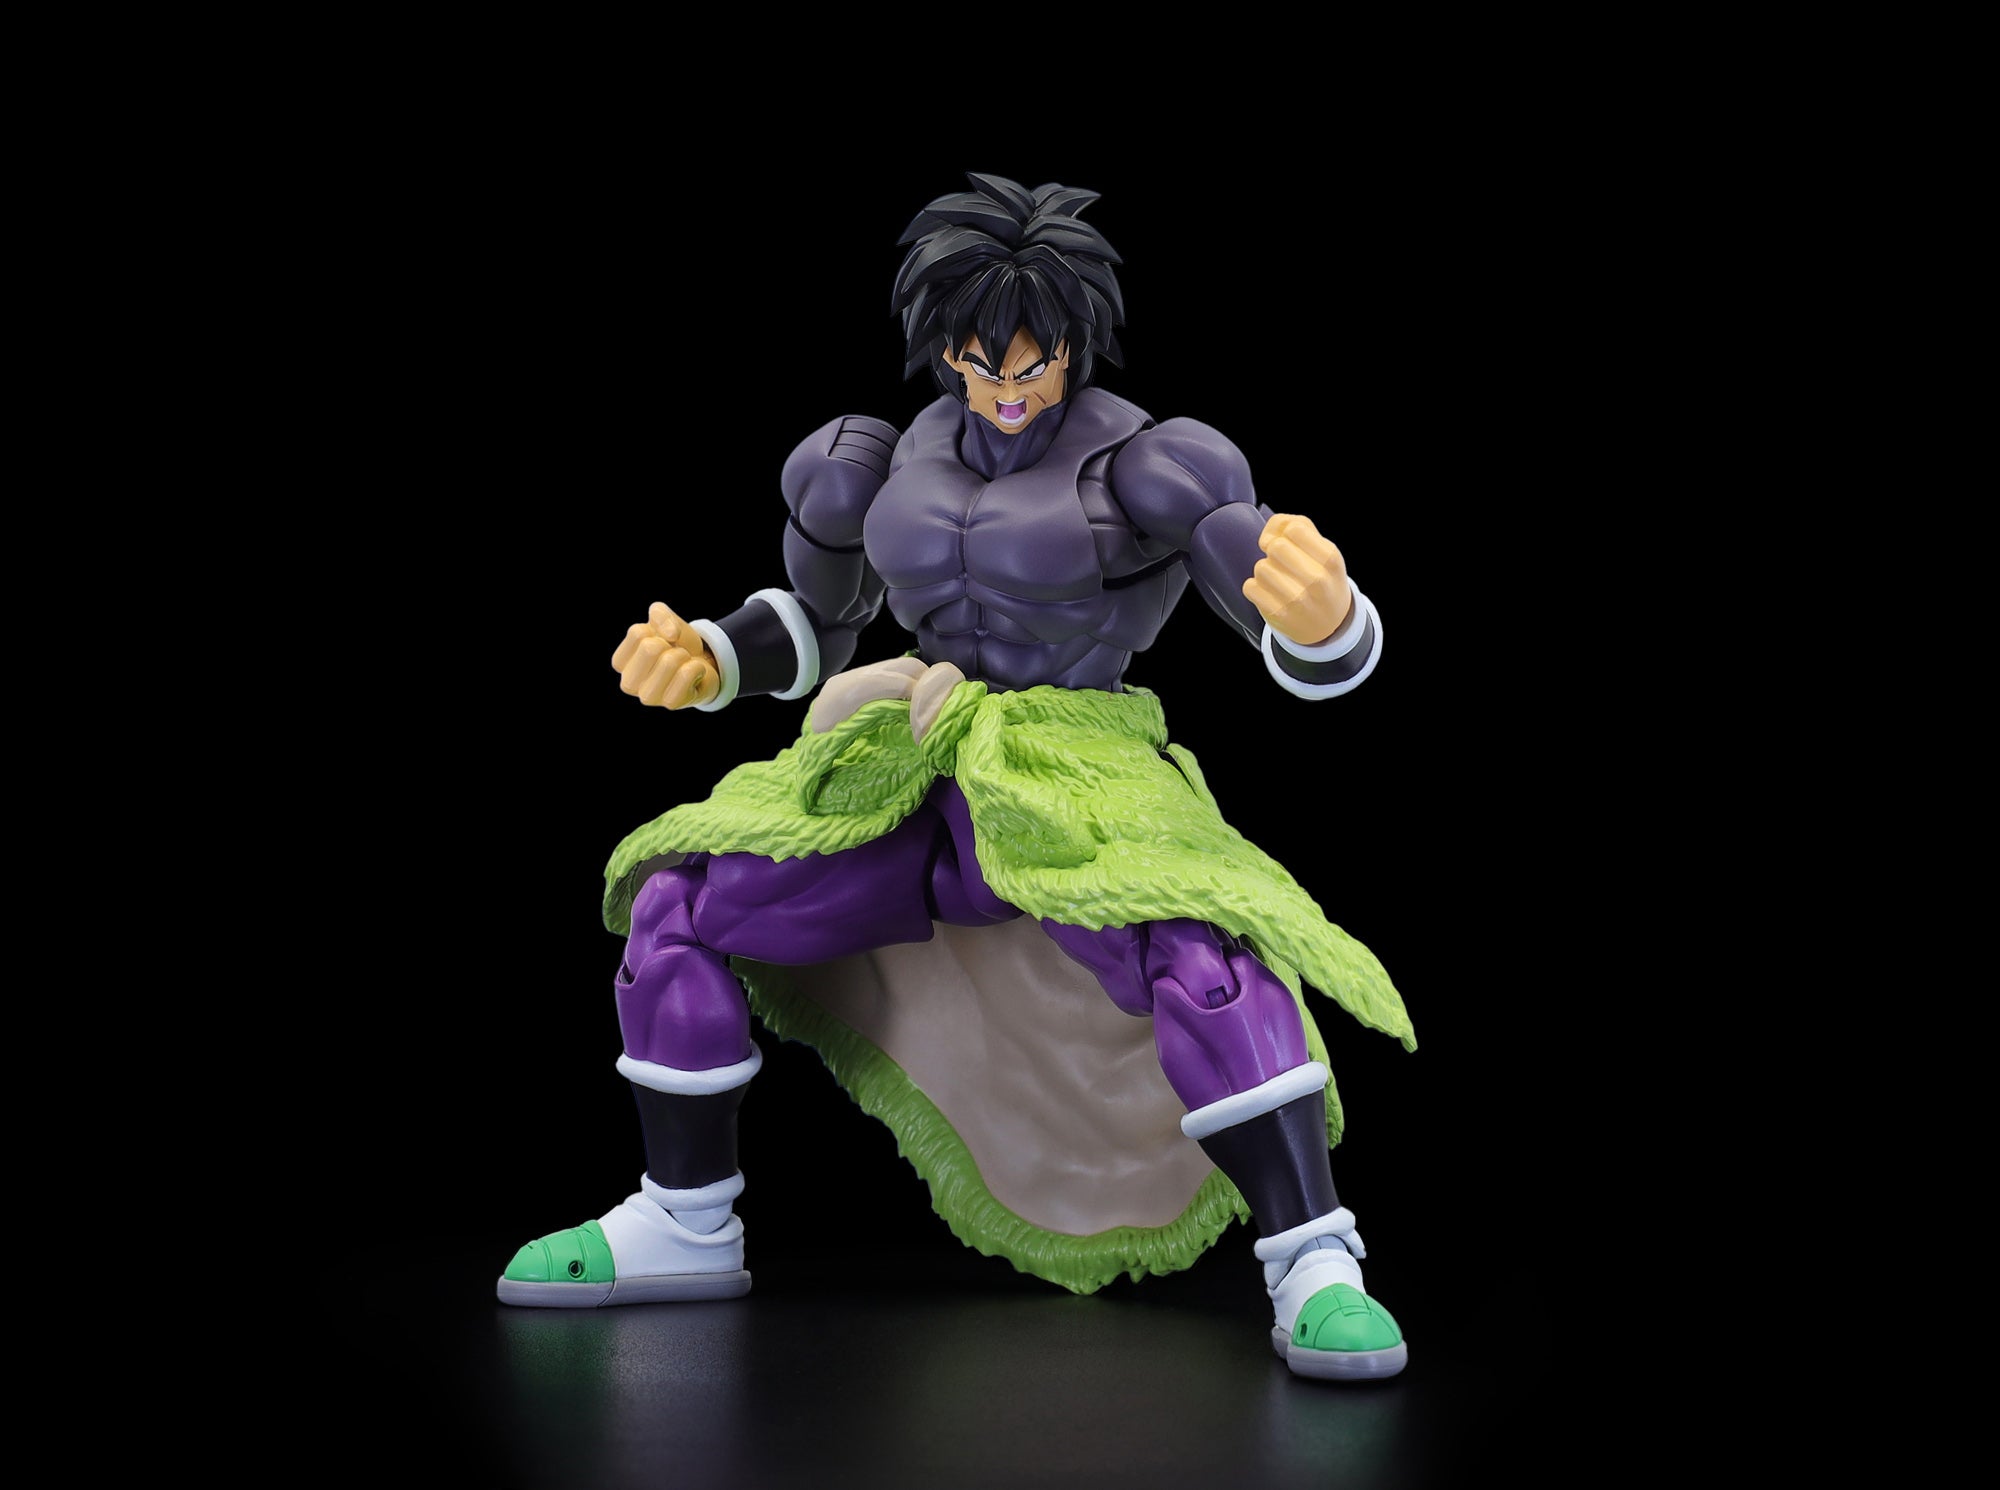 BROLY SUPER HERO By S.H.Figuarts